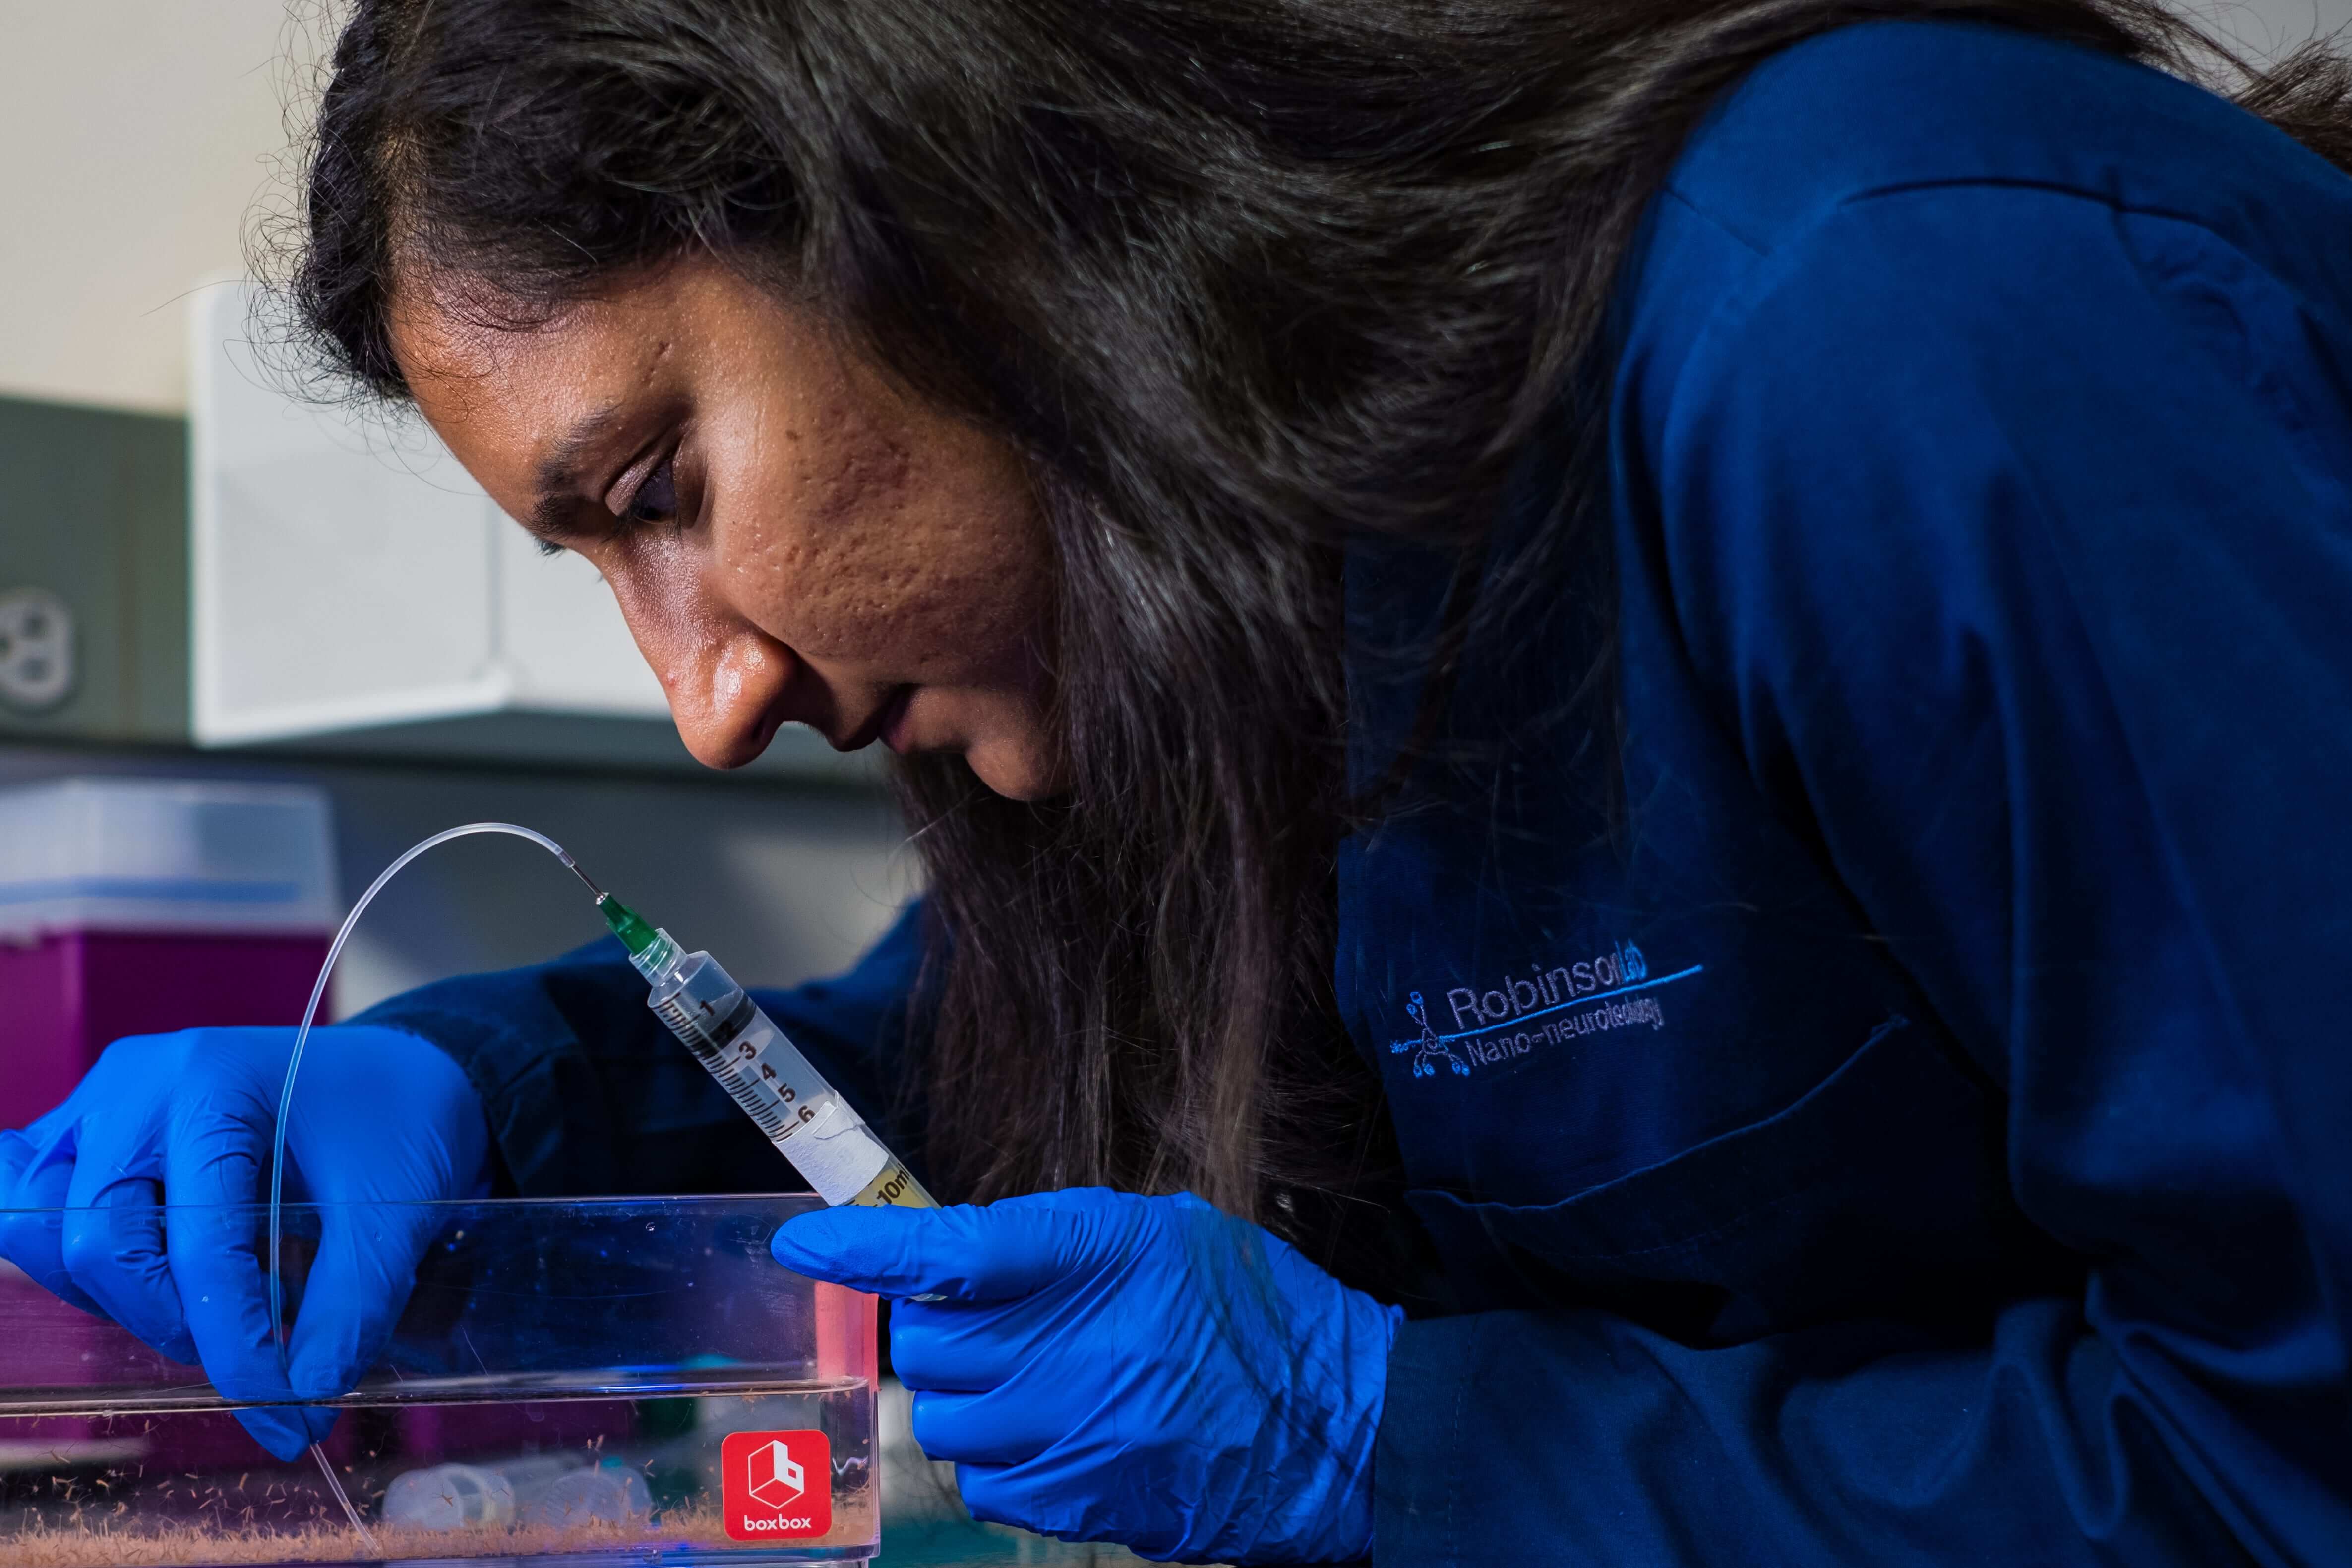 Rice University graduate student Krishna Badhiwala captures a hydra for study in one of the lab's custom microfluidic systems. The Rice lab is studying hydra to characterize the relationship between its neural activity and muscle movements. (Credit: Jeff Fitlow/Rice University)